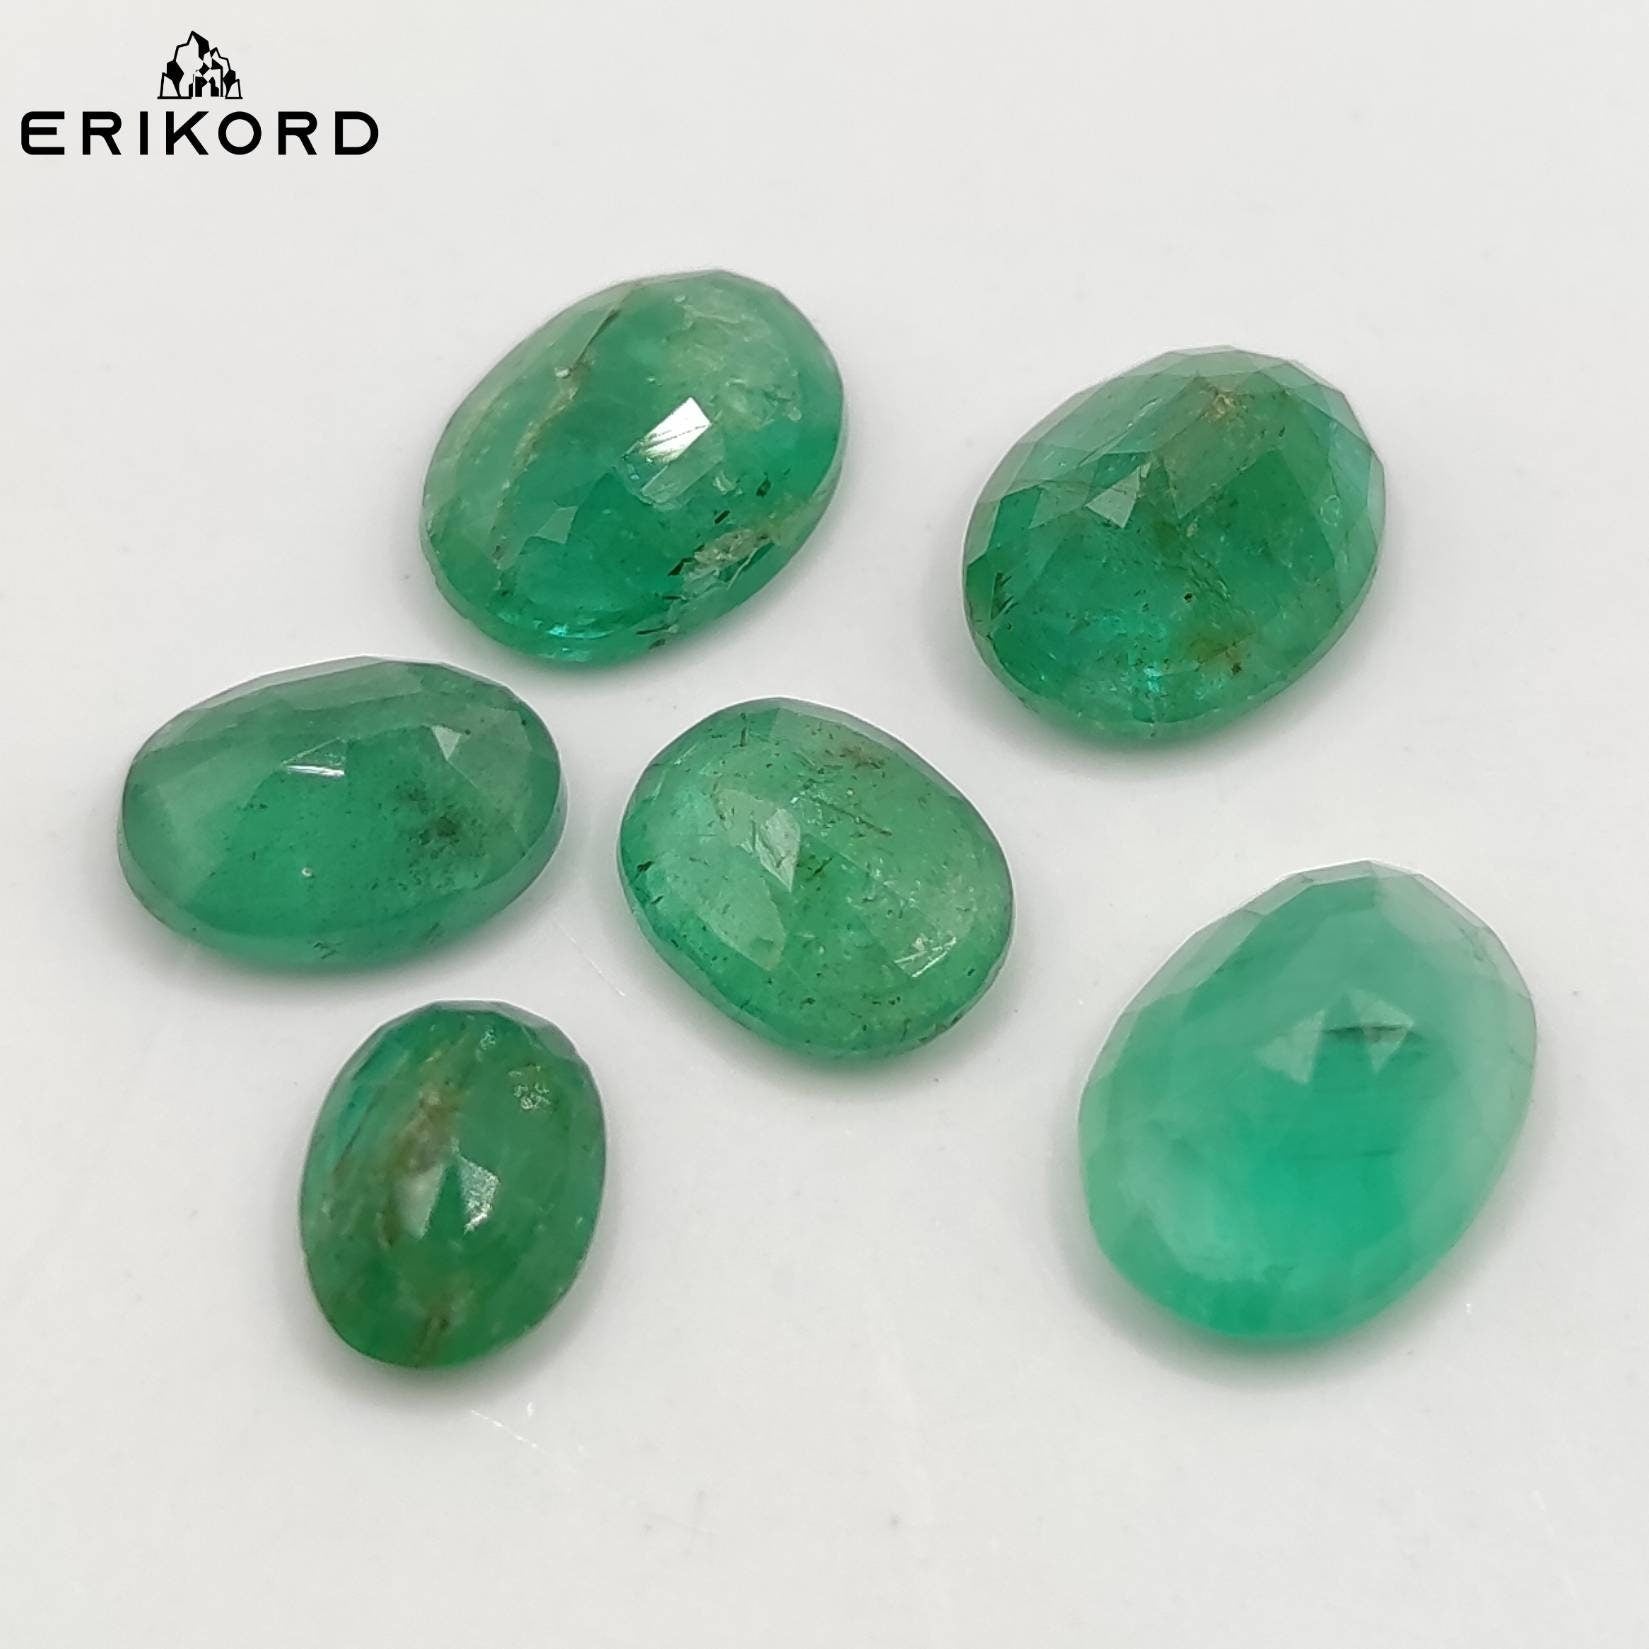 7.75ct Lot of Emerald Green Emerald Zambian Emeralds Loose Gems Untreated Emerald Faceted Oval Cut Gemstone Ring Earrings Cut Gems Polished